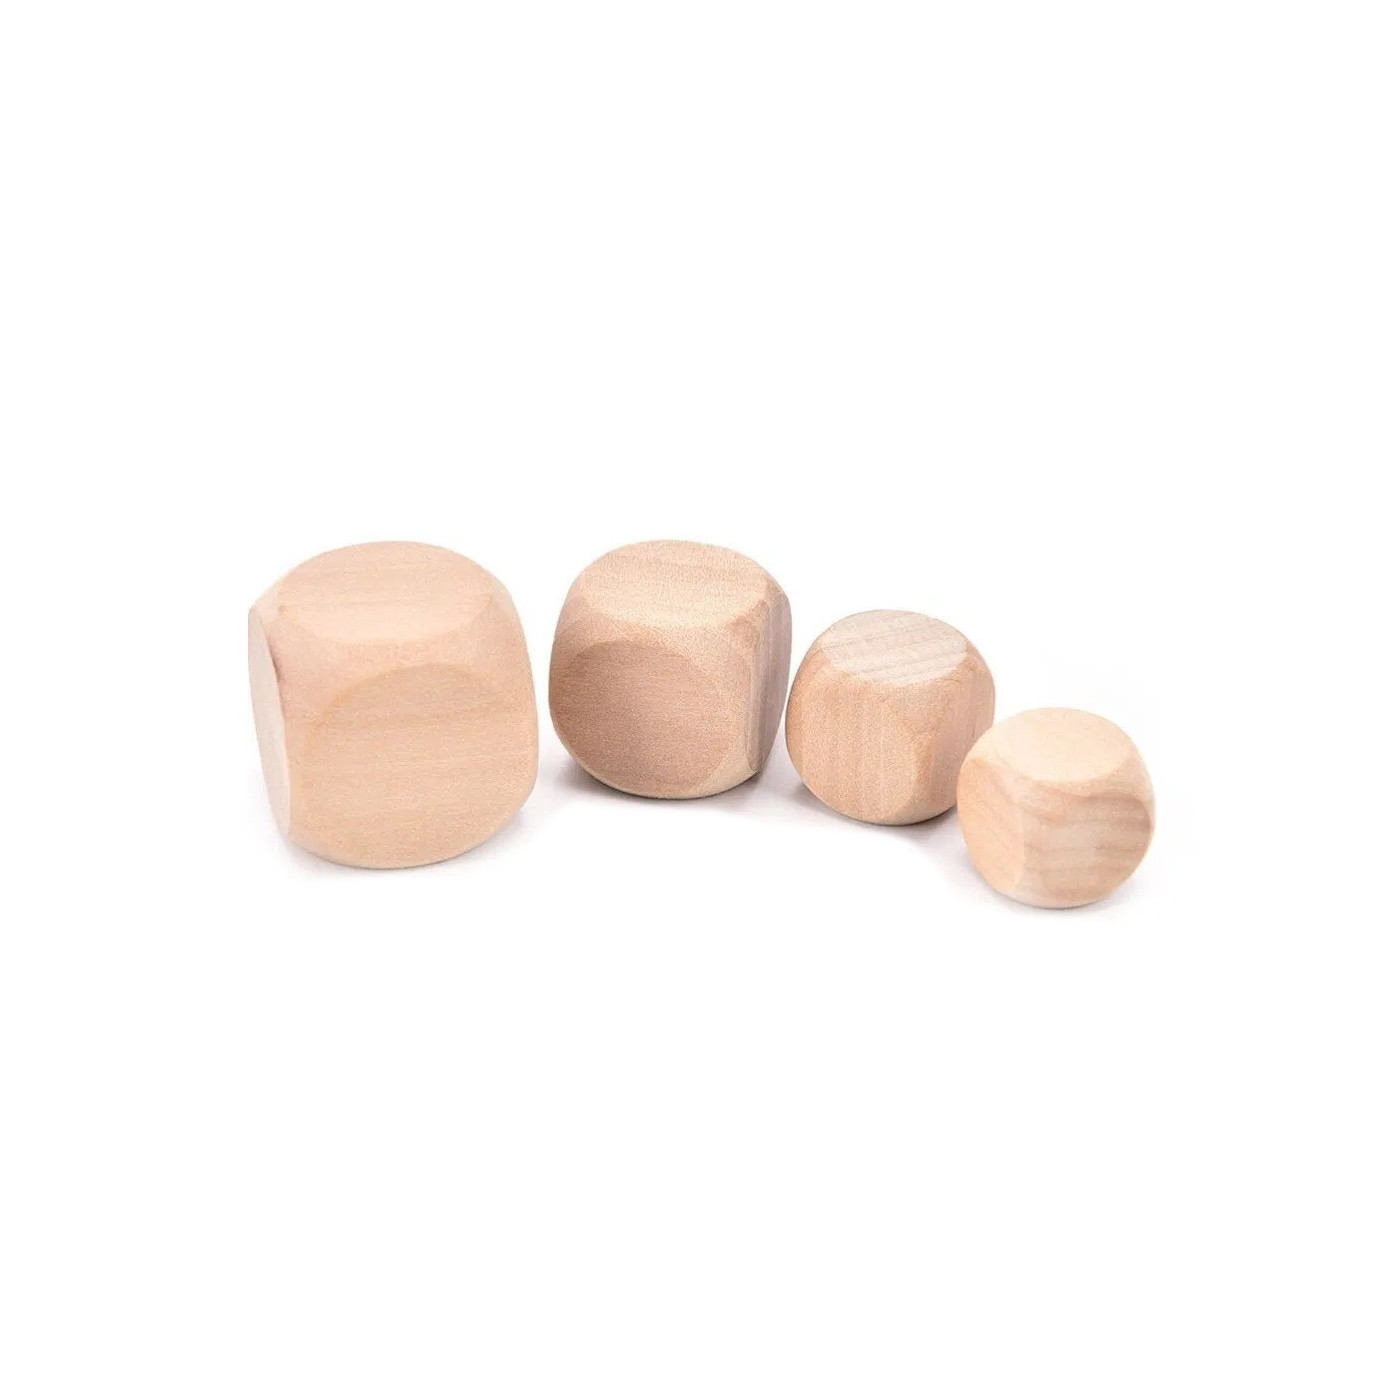 Set of 100 wooden cubes (dice), size: large (25 mm)